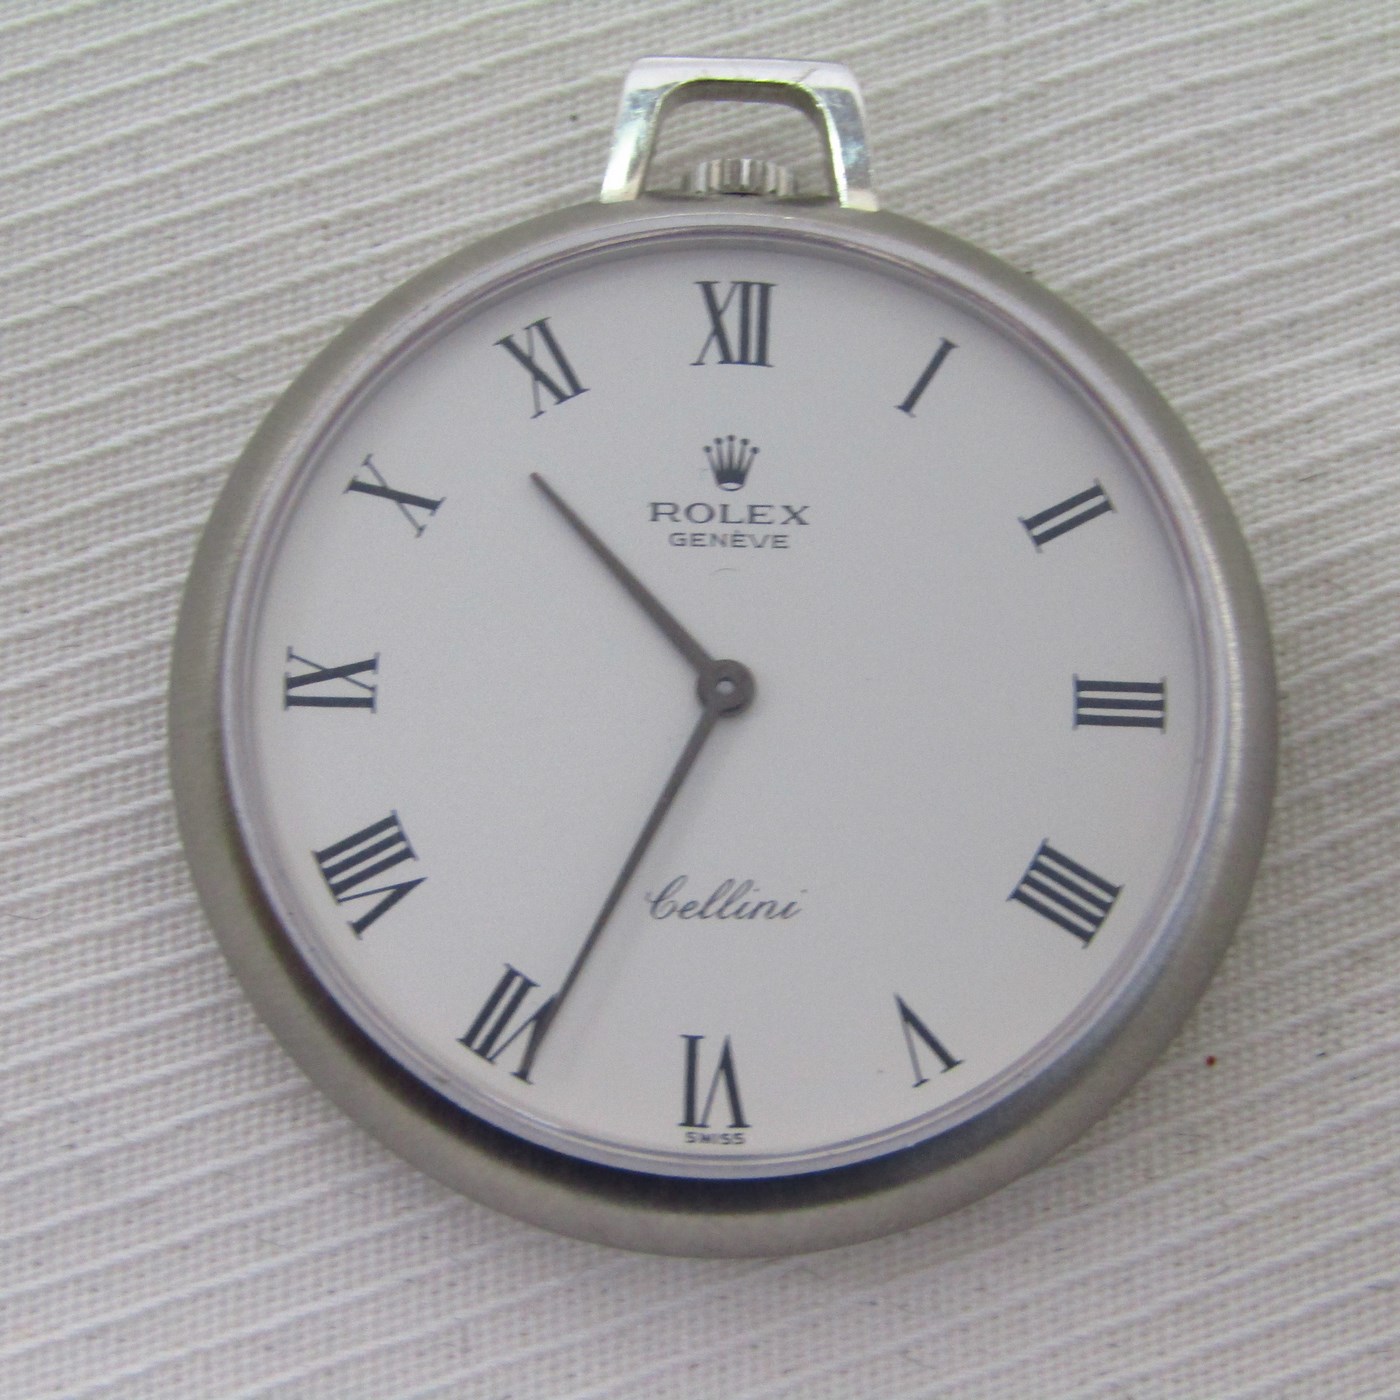 ROLEX Cellini. Pocket watch, lepine and 